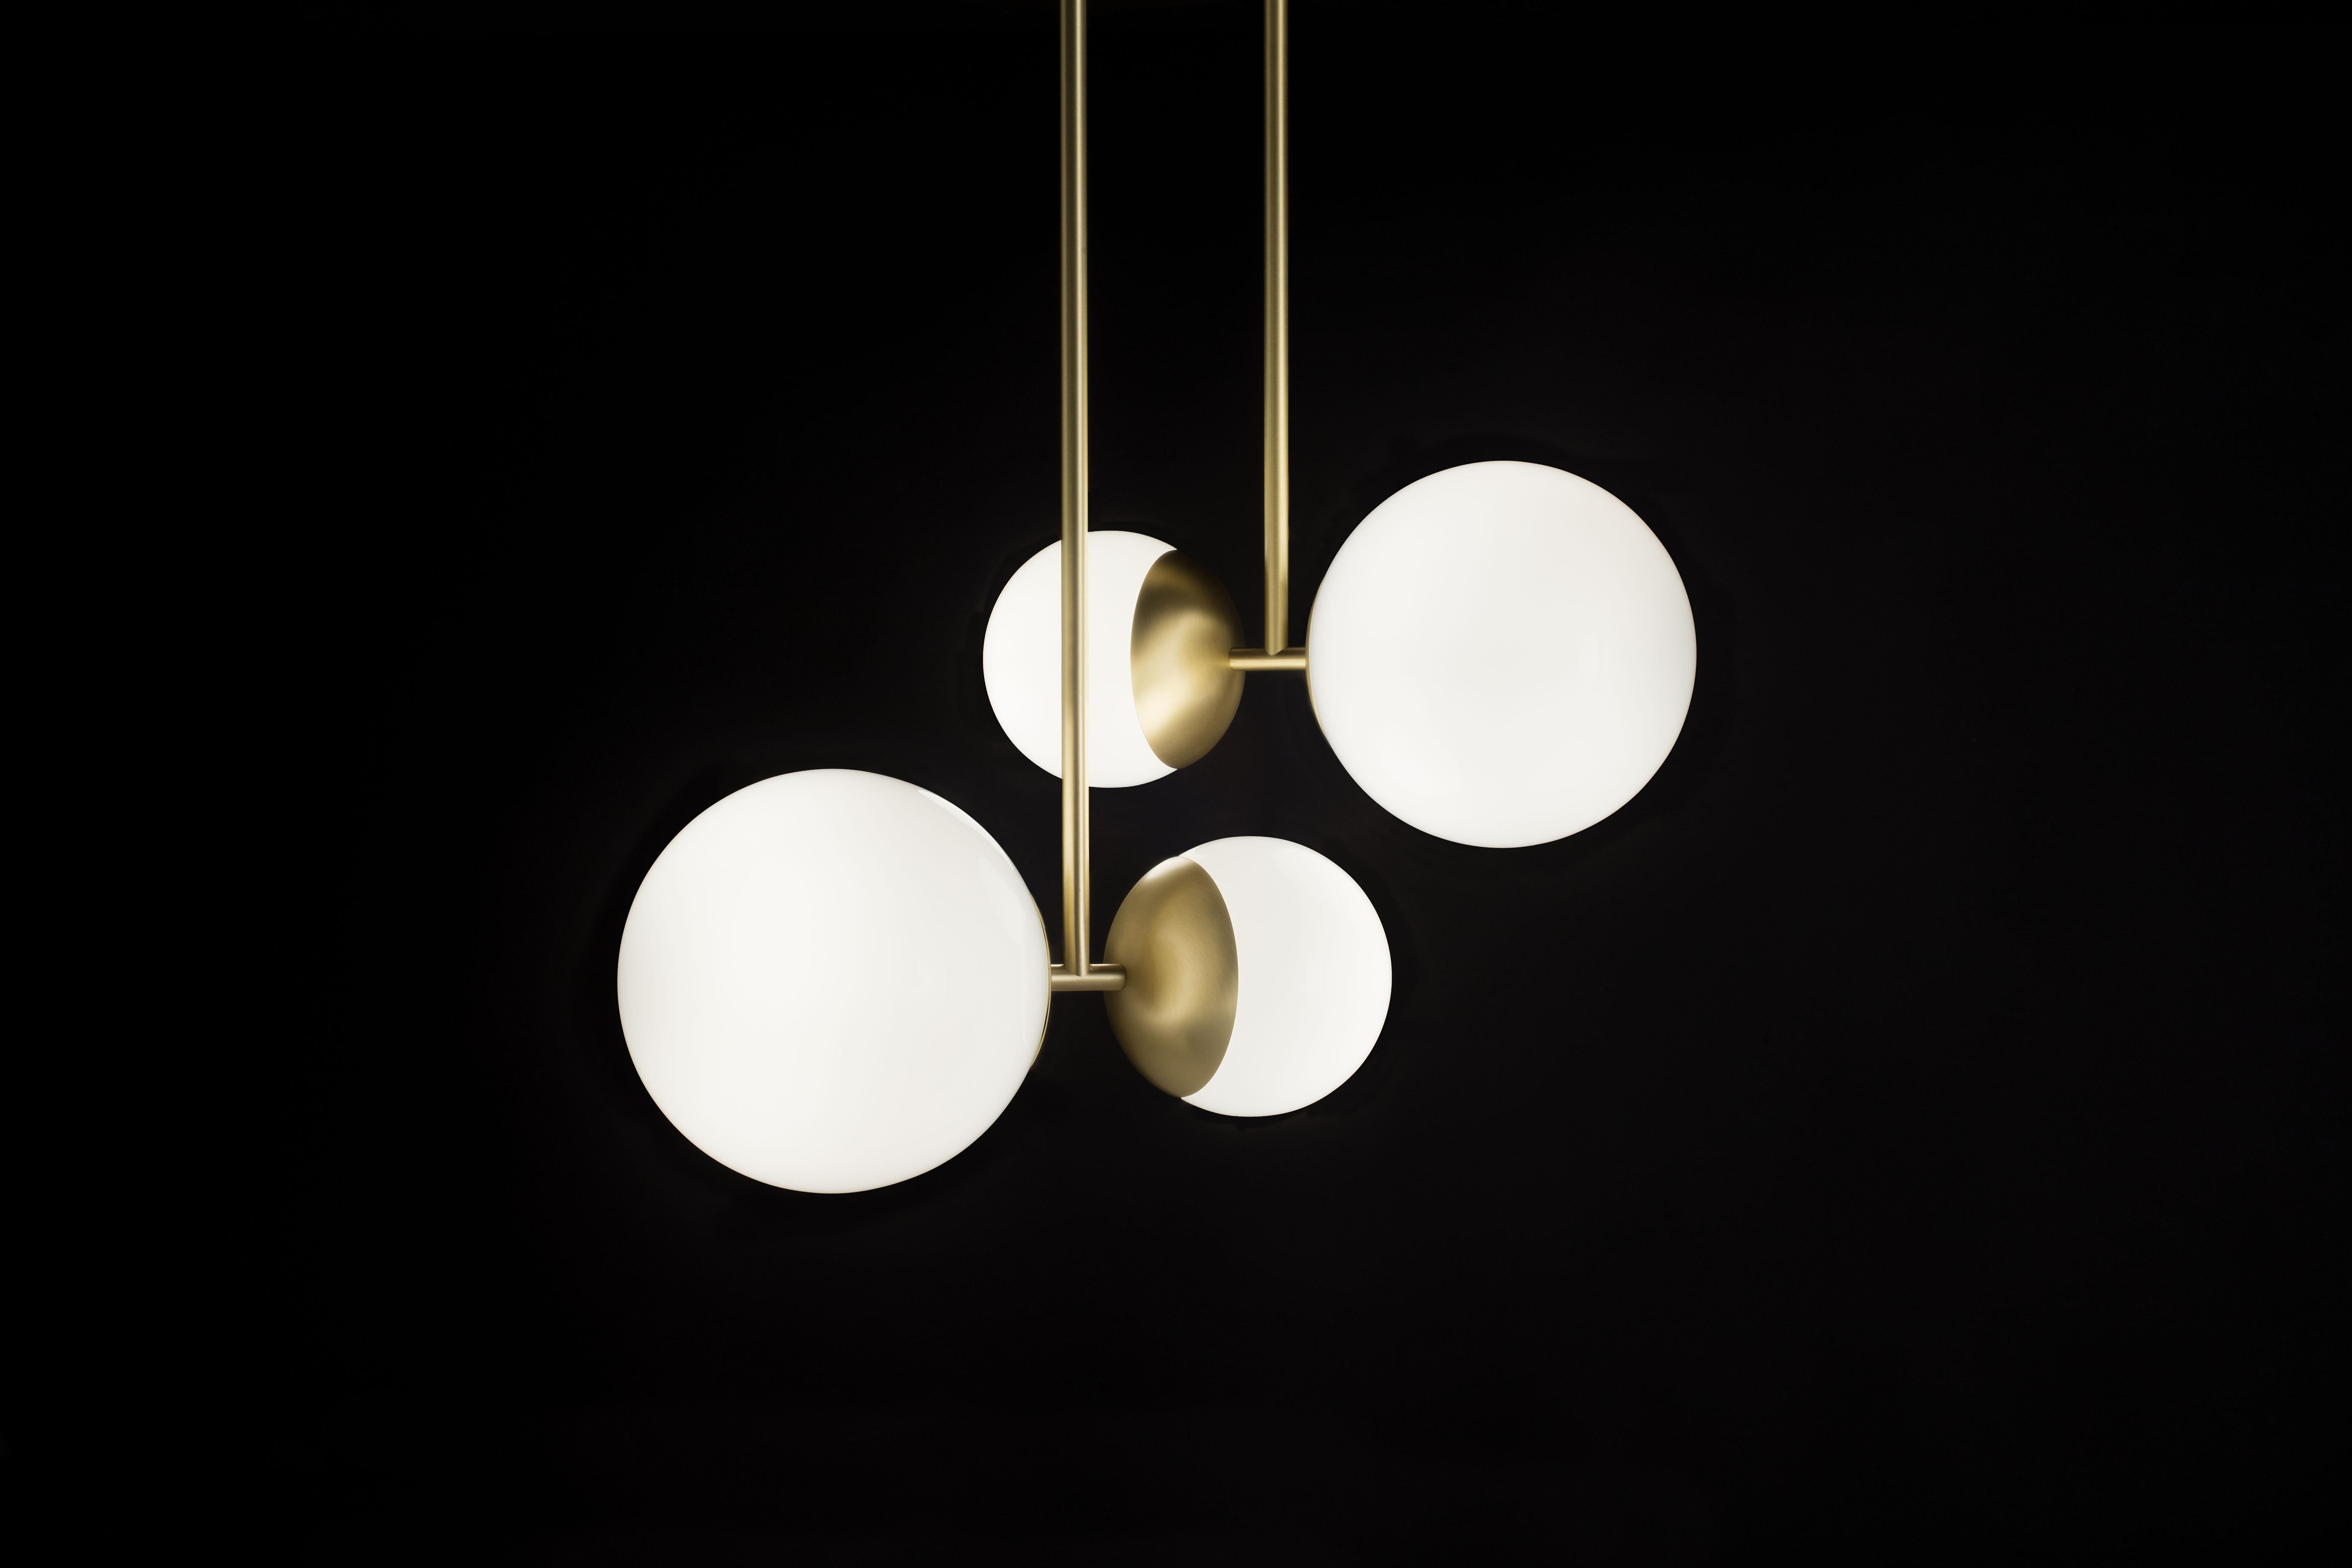 Biba Sospensione ceiling lamp in satin brass and white glass for Tato Italia. 

Designed by Lorenza Bozzoli in 2017 this lamp is executed in a brushed brass combined with a white glass using the finest materials available and to the exacting